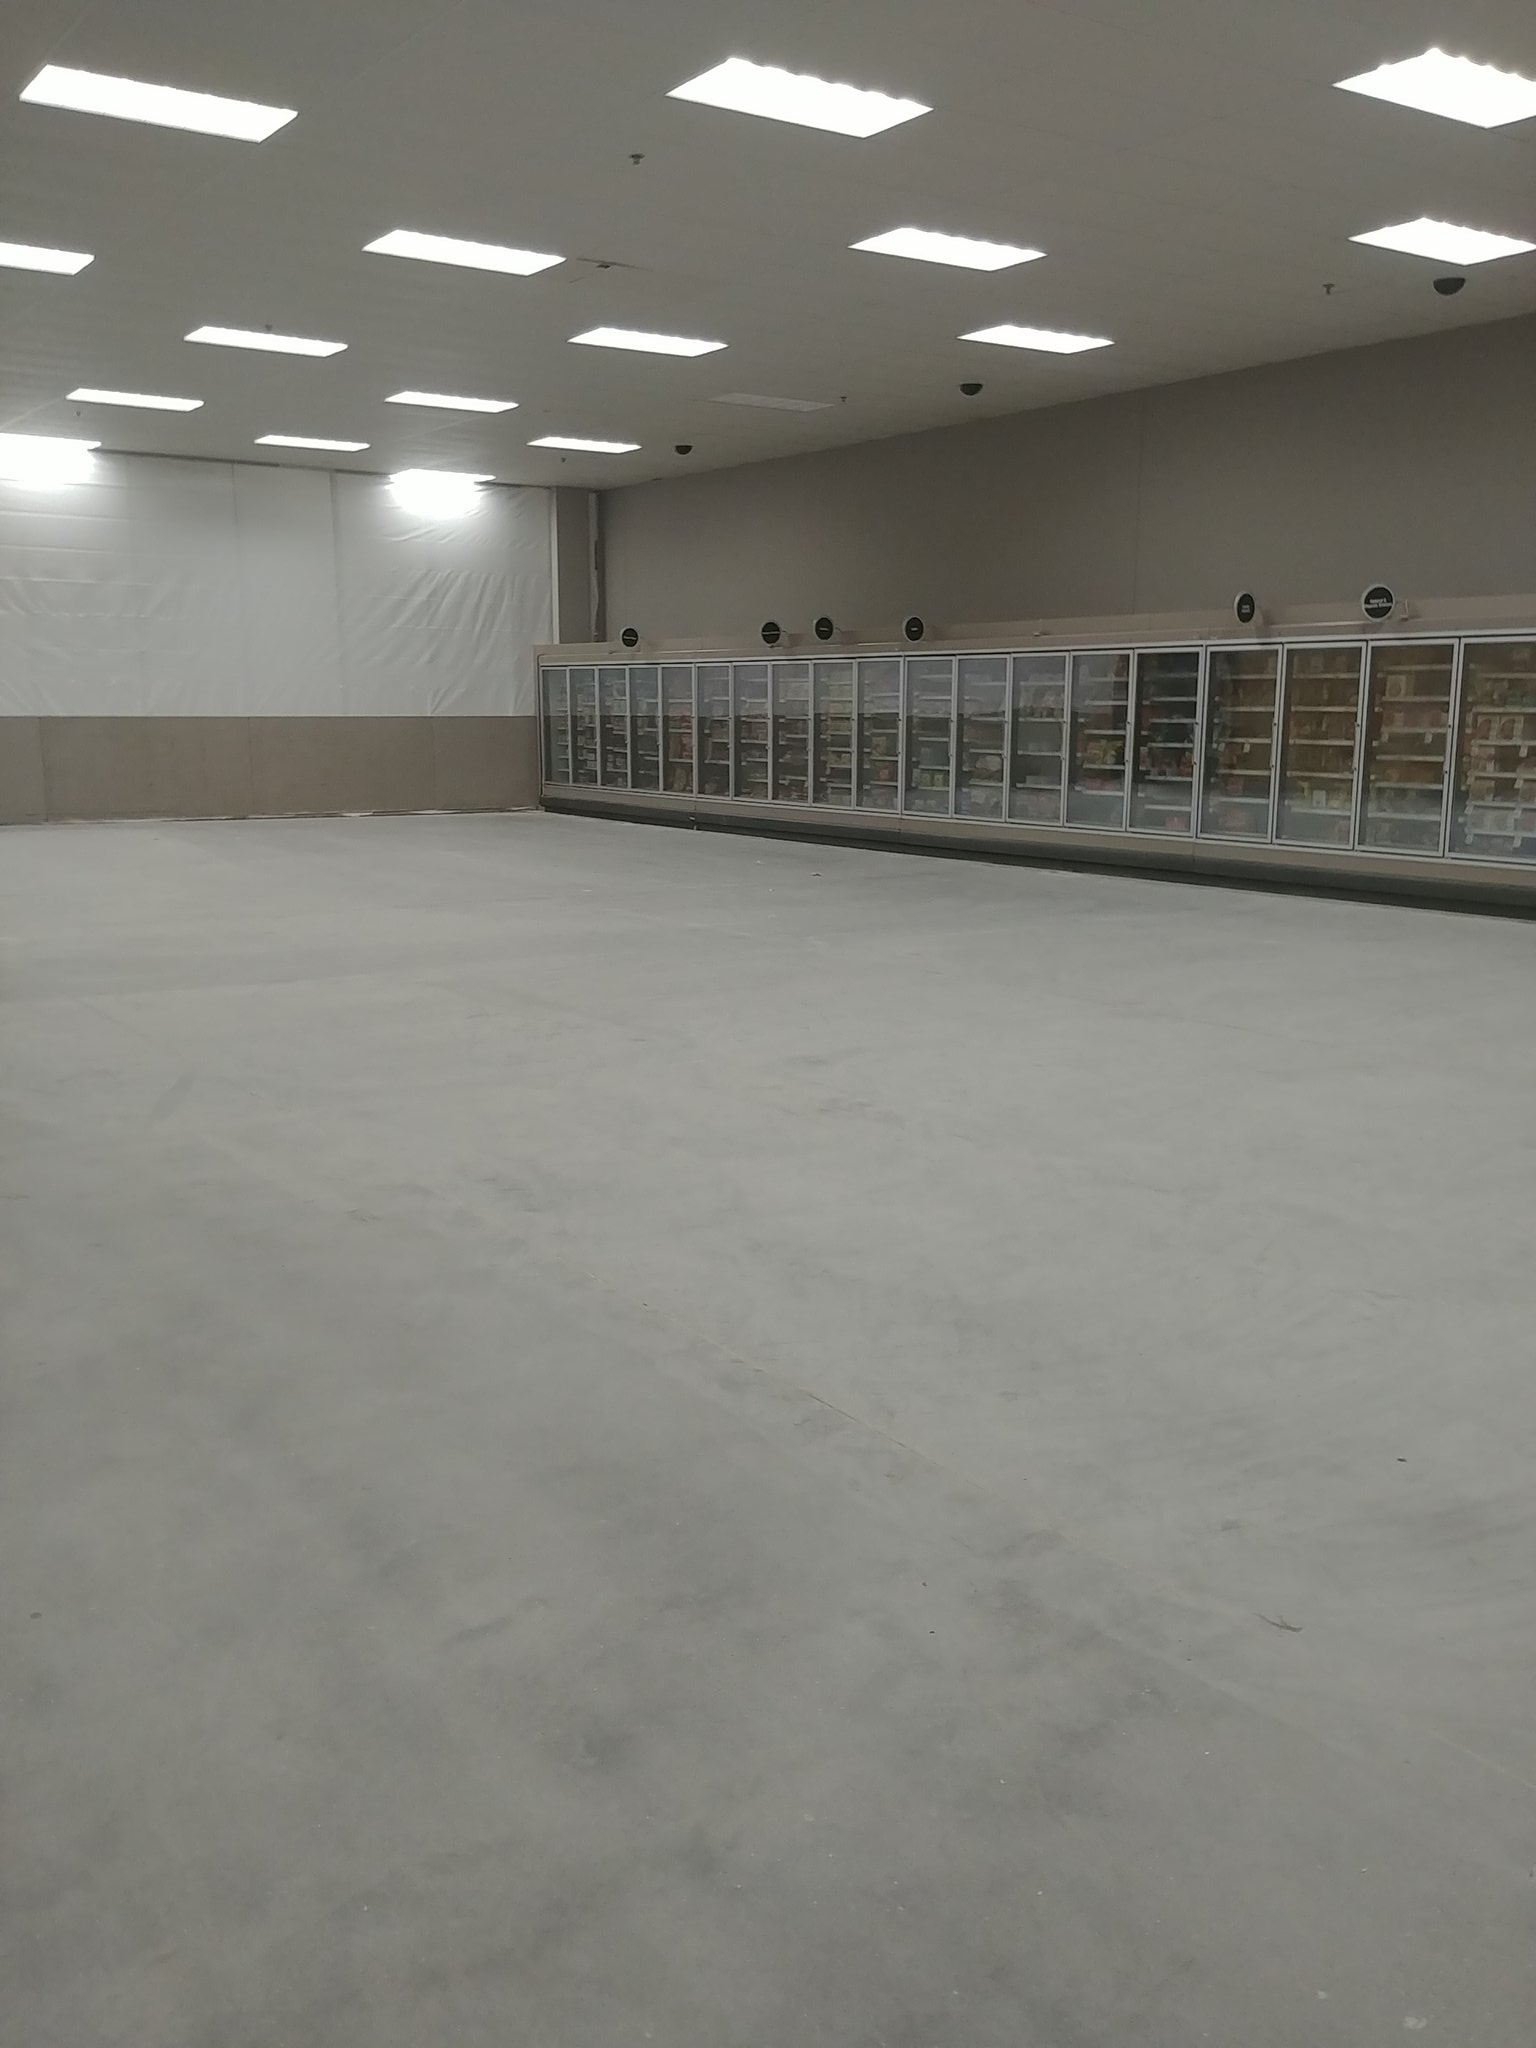 I am now on Level 13: The Eternal Kmart. Any tips to get out? : r/backrooms